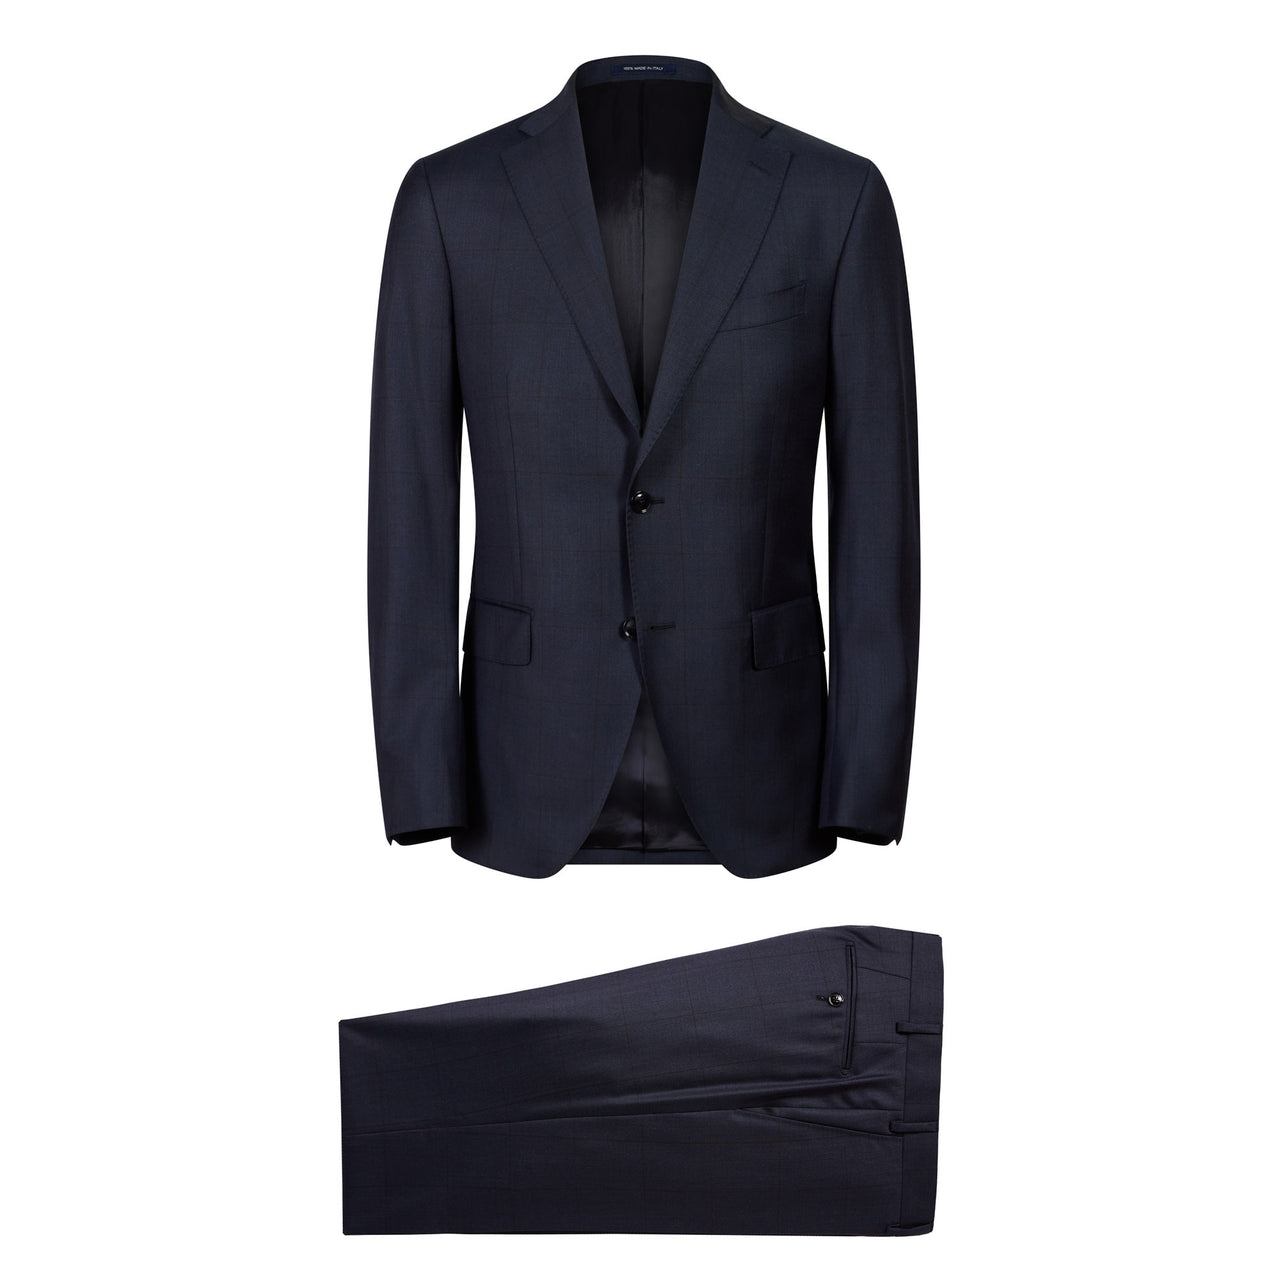 HENRY SARTORIAL X LATORRE Check Suit NAVY BLUE